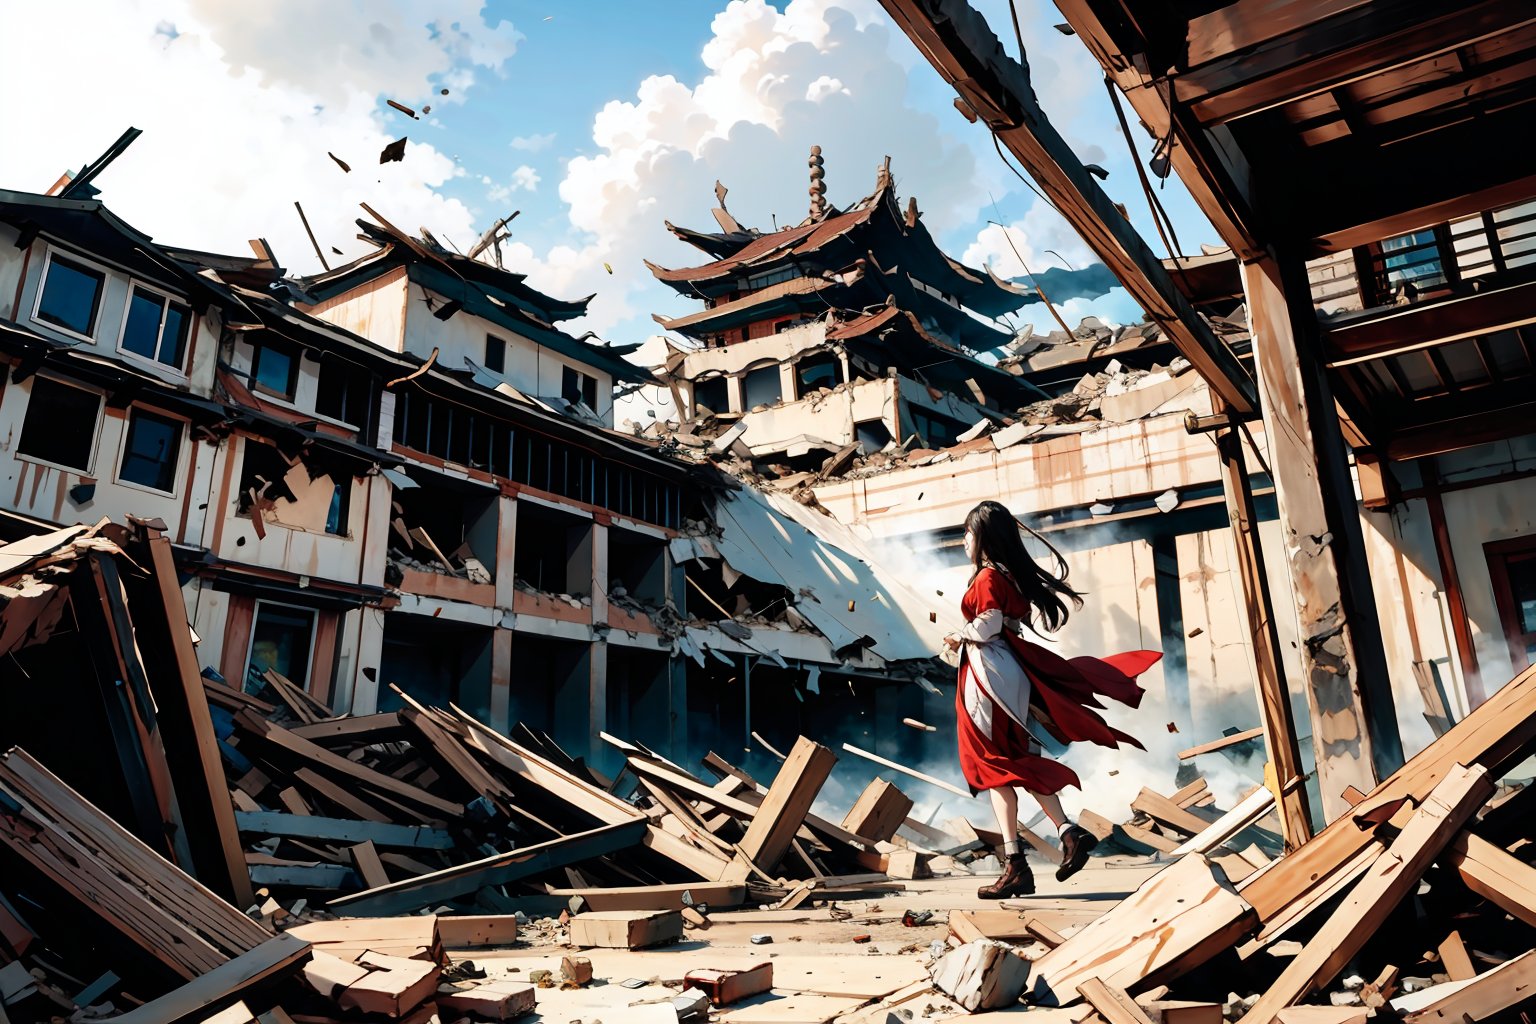 A dramatic scene unfolds in an ancient Chinese courtyard: a grand temple's ceiling begins to crumble, sending dust and debris raining down. A lone figure, dressed in traditional hanfu attire, cowers beneath the falling rubble as the once-sturdy structure now teeters on the brink of collapse.